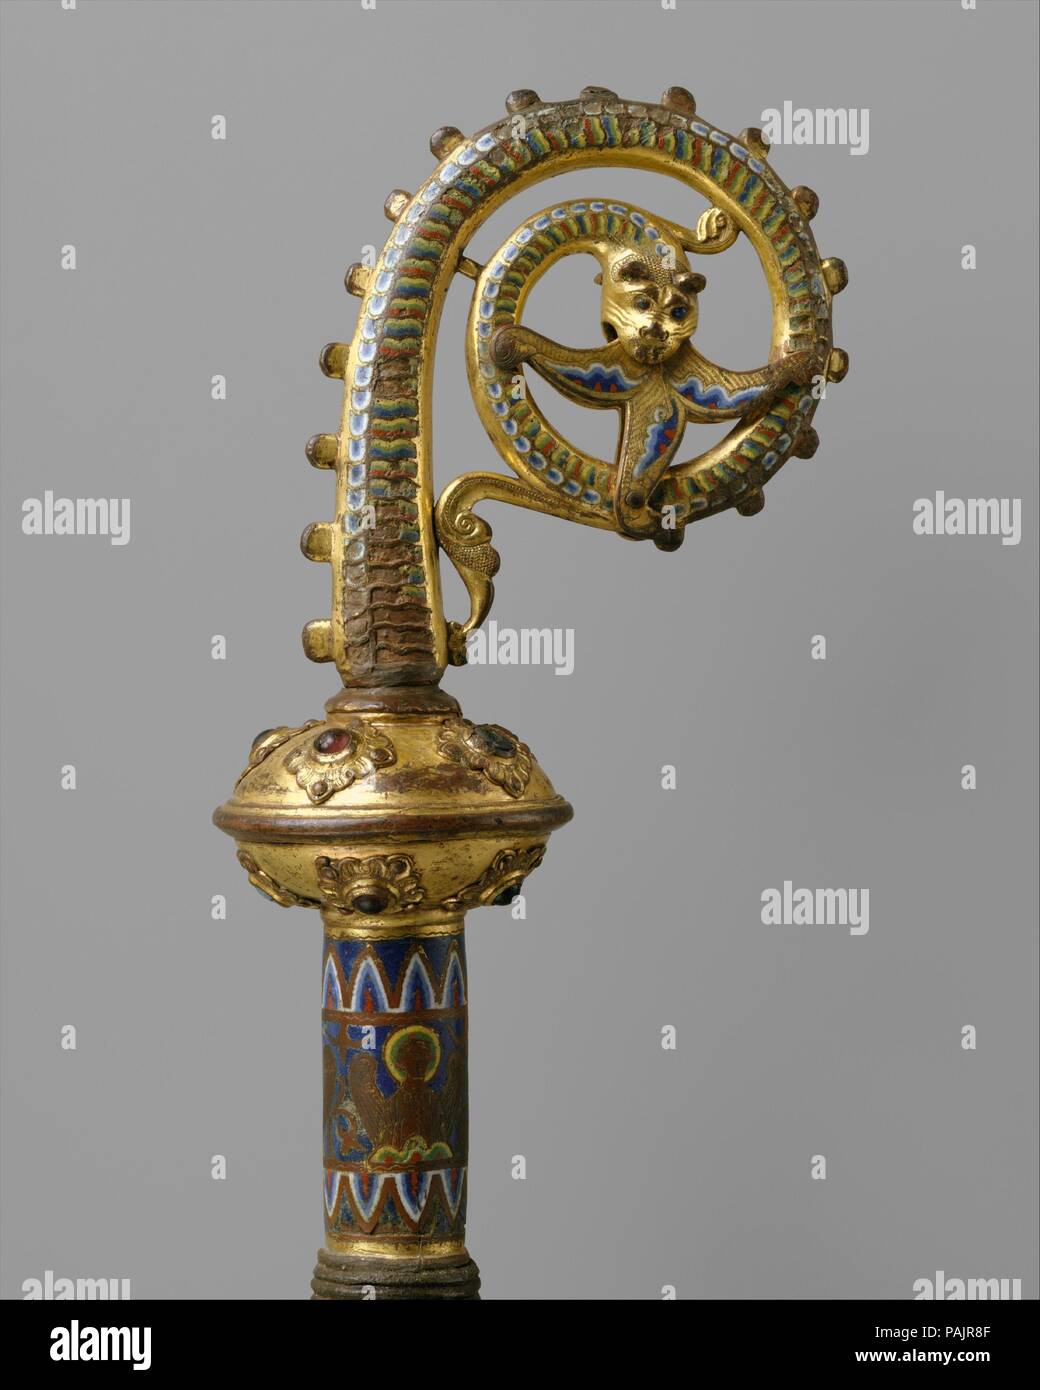 Head of a Crozier with a Serpent Devouring a Flower. Culture: French. Dimensions: 9 1/8 × 5 1/16 × 2 3/4 in. (23.1 × 12.8 × 7 cm). Date: ca. 1200-1220.  As early as the sixth century, the pastoral staff, or crozier, conveyed the authority of a bishop, abbot, or abbess. The serpent and flower are frequently combined on enamel croziers from Limoges. They allude to the rod of Moses that, in the presence of Pharaoh, miraculously turned into a serpent at the command of God, and to the flowering rod of Aaron, symbol of his election to the priesthood by God. Museum: Metropolitan Museum of Art, New Yo Stock Photo